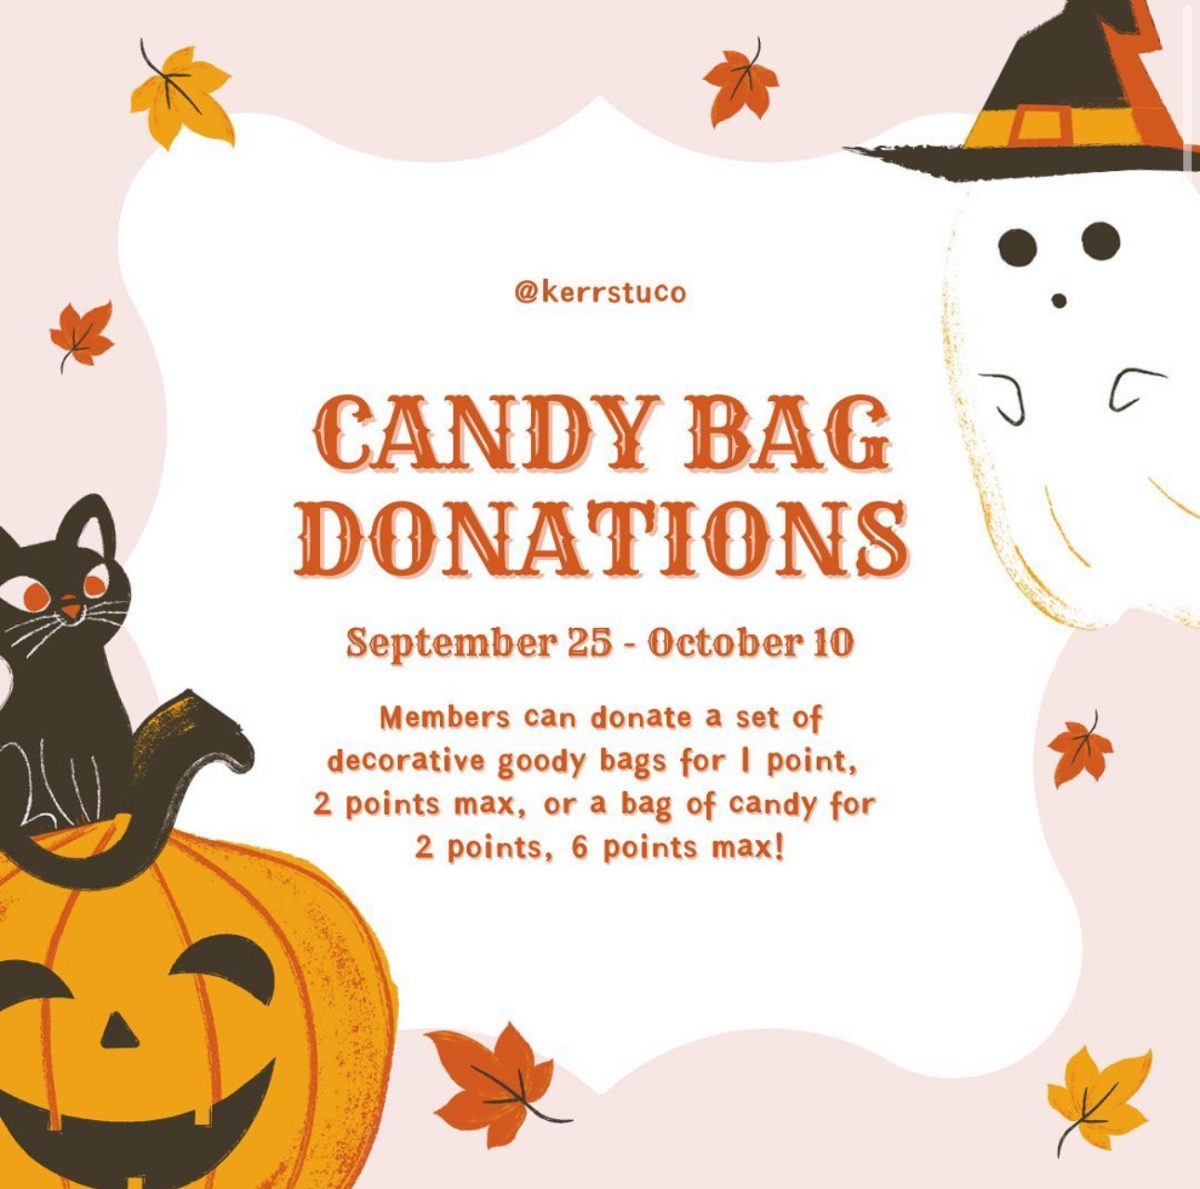 Student Council’s advertisement for the Candy Bag Donations on the Kerr STUCO Instagram page.
